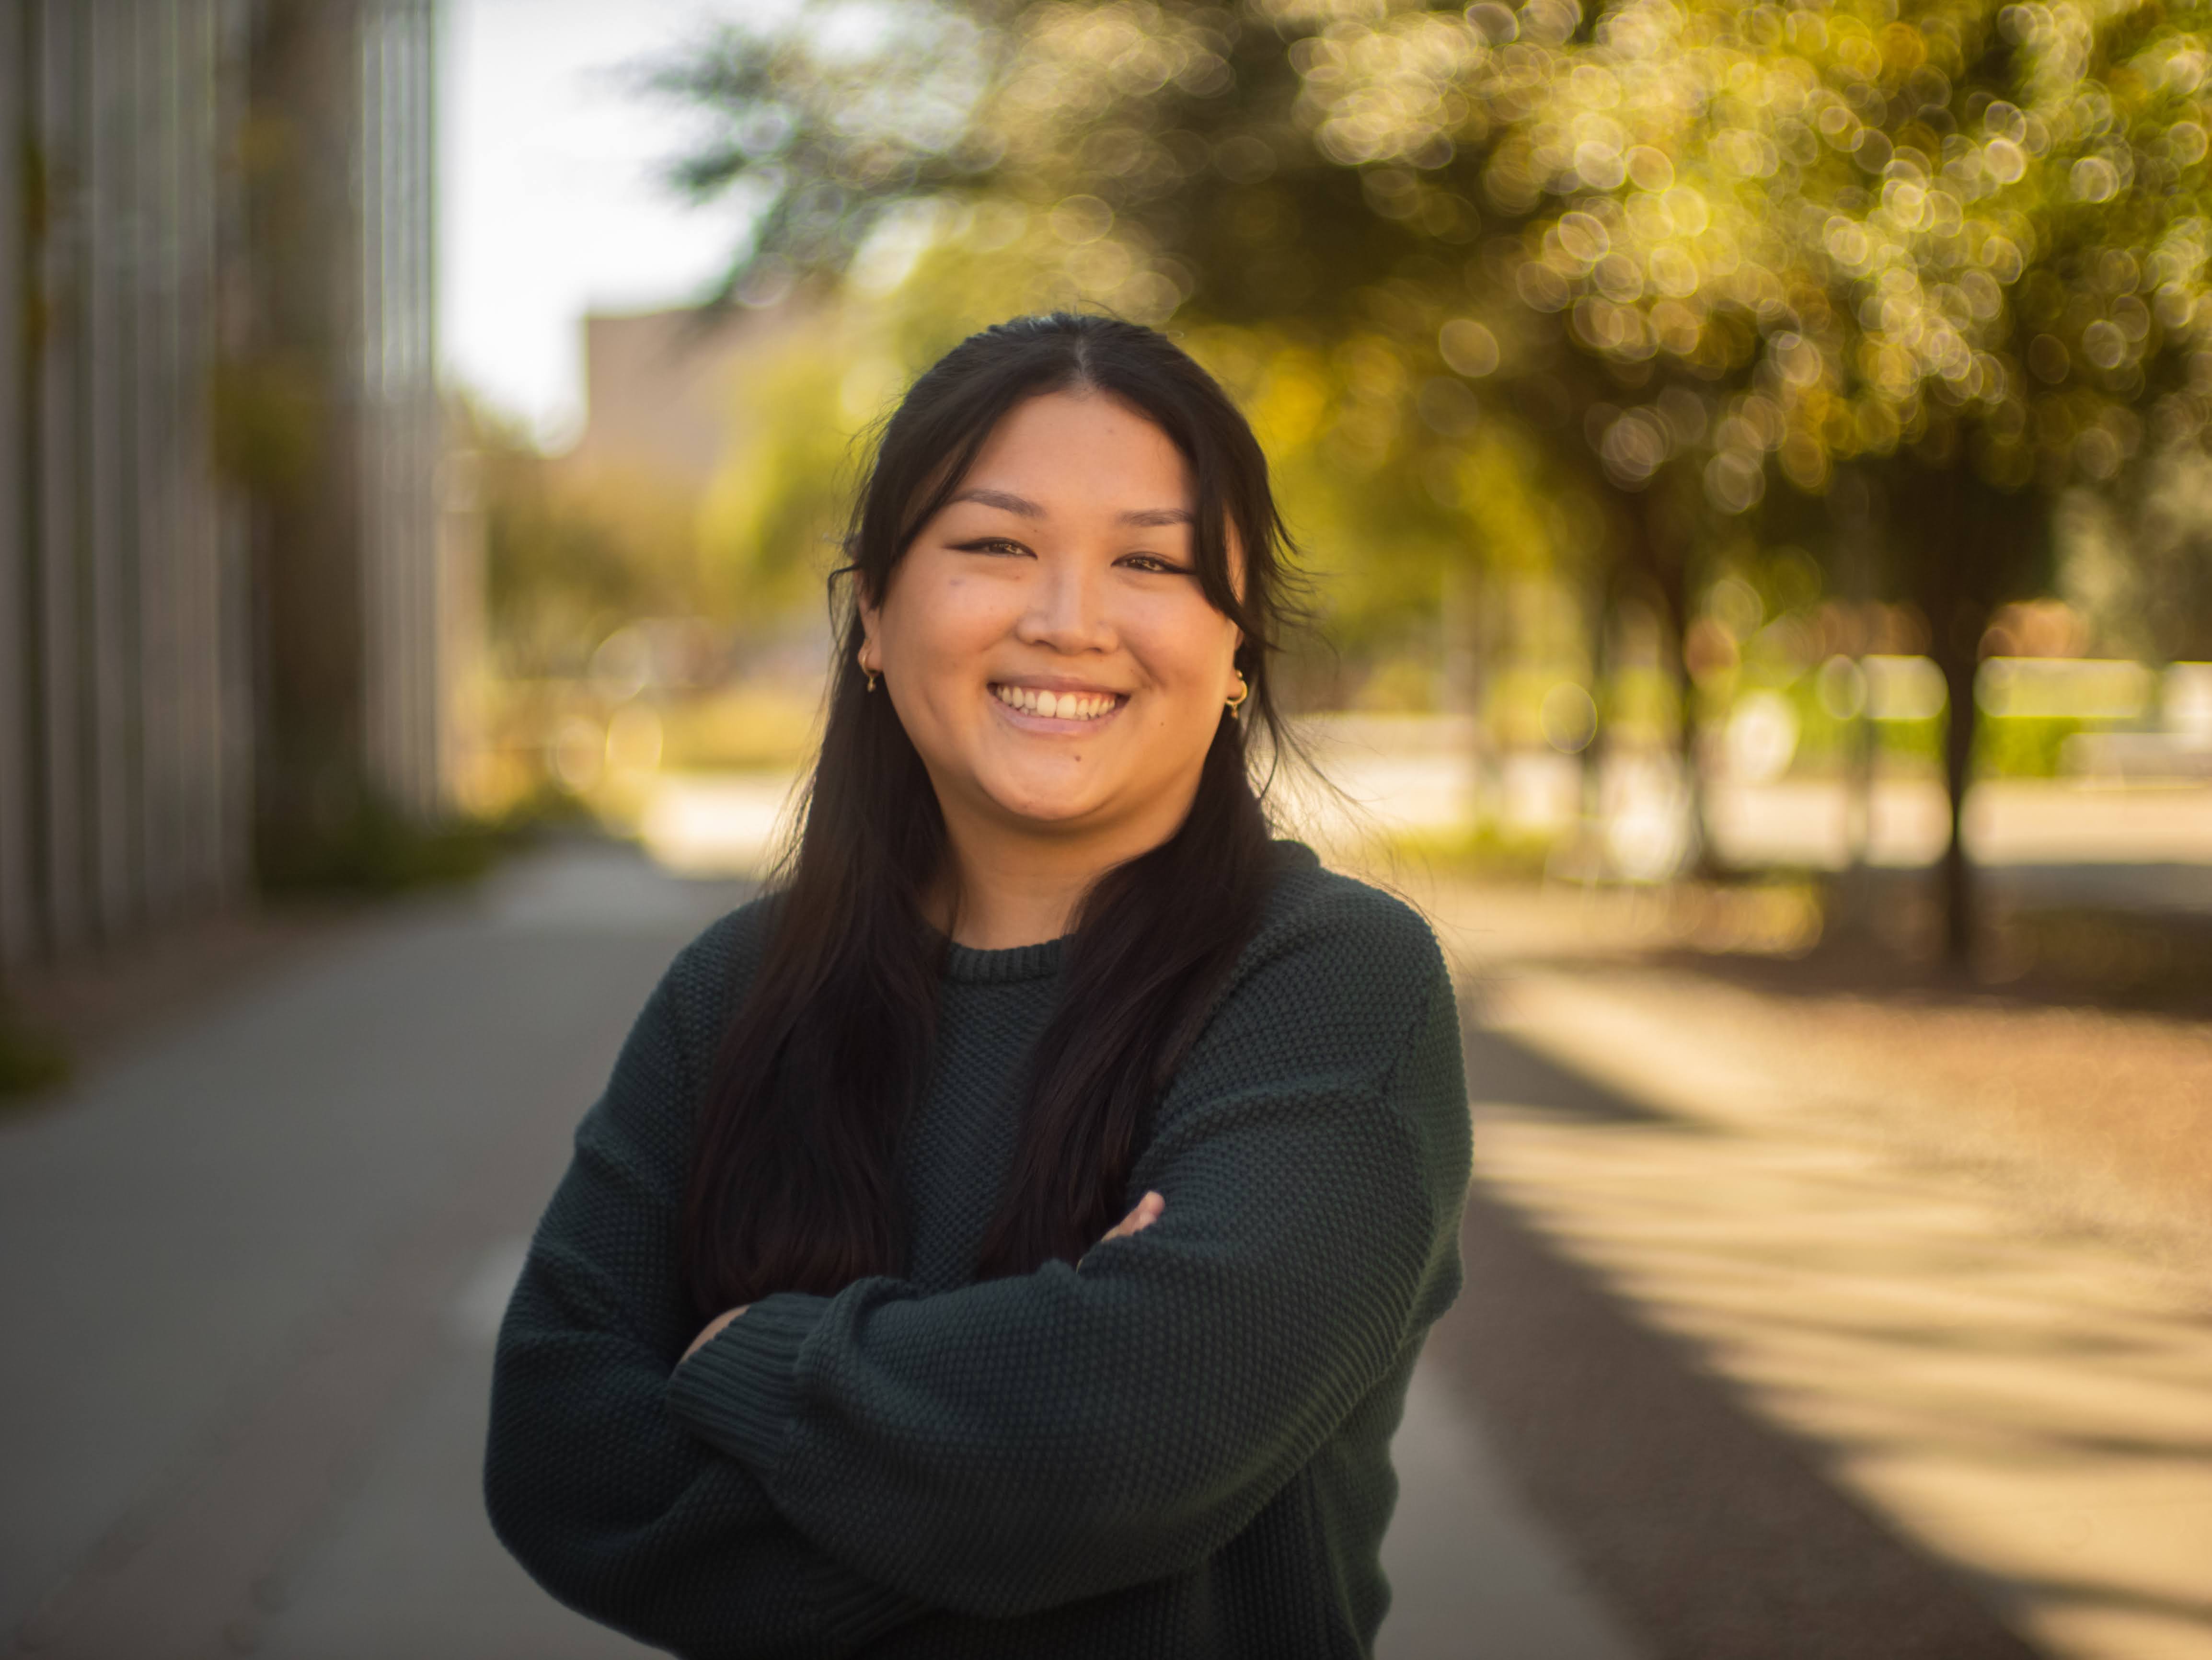   
																Psychology undergraduate aims to better understand the role of discrimination in sleep 
															 